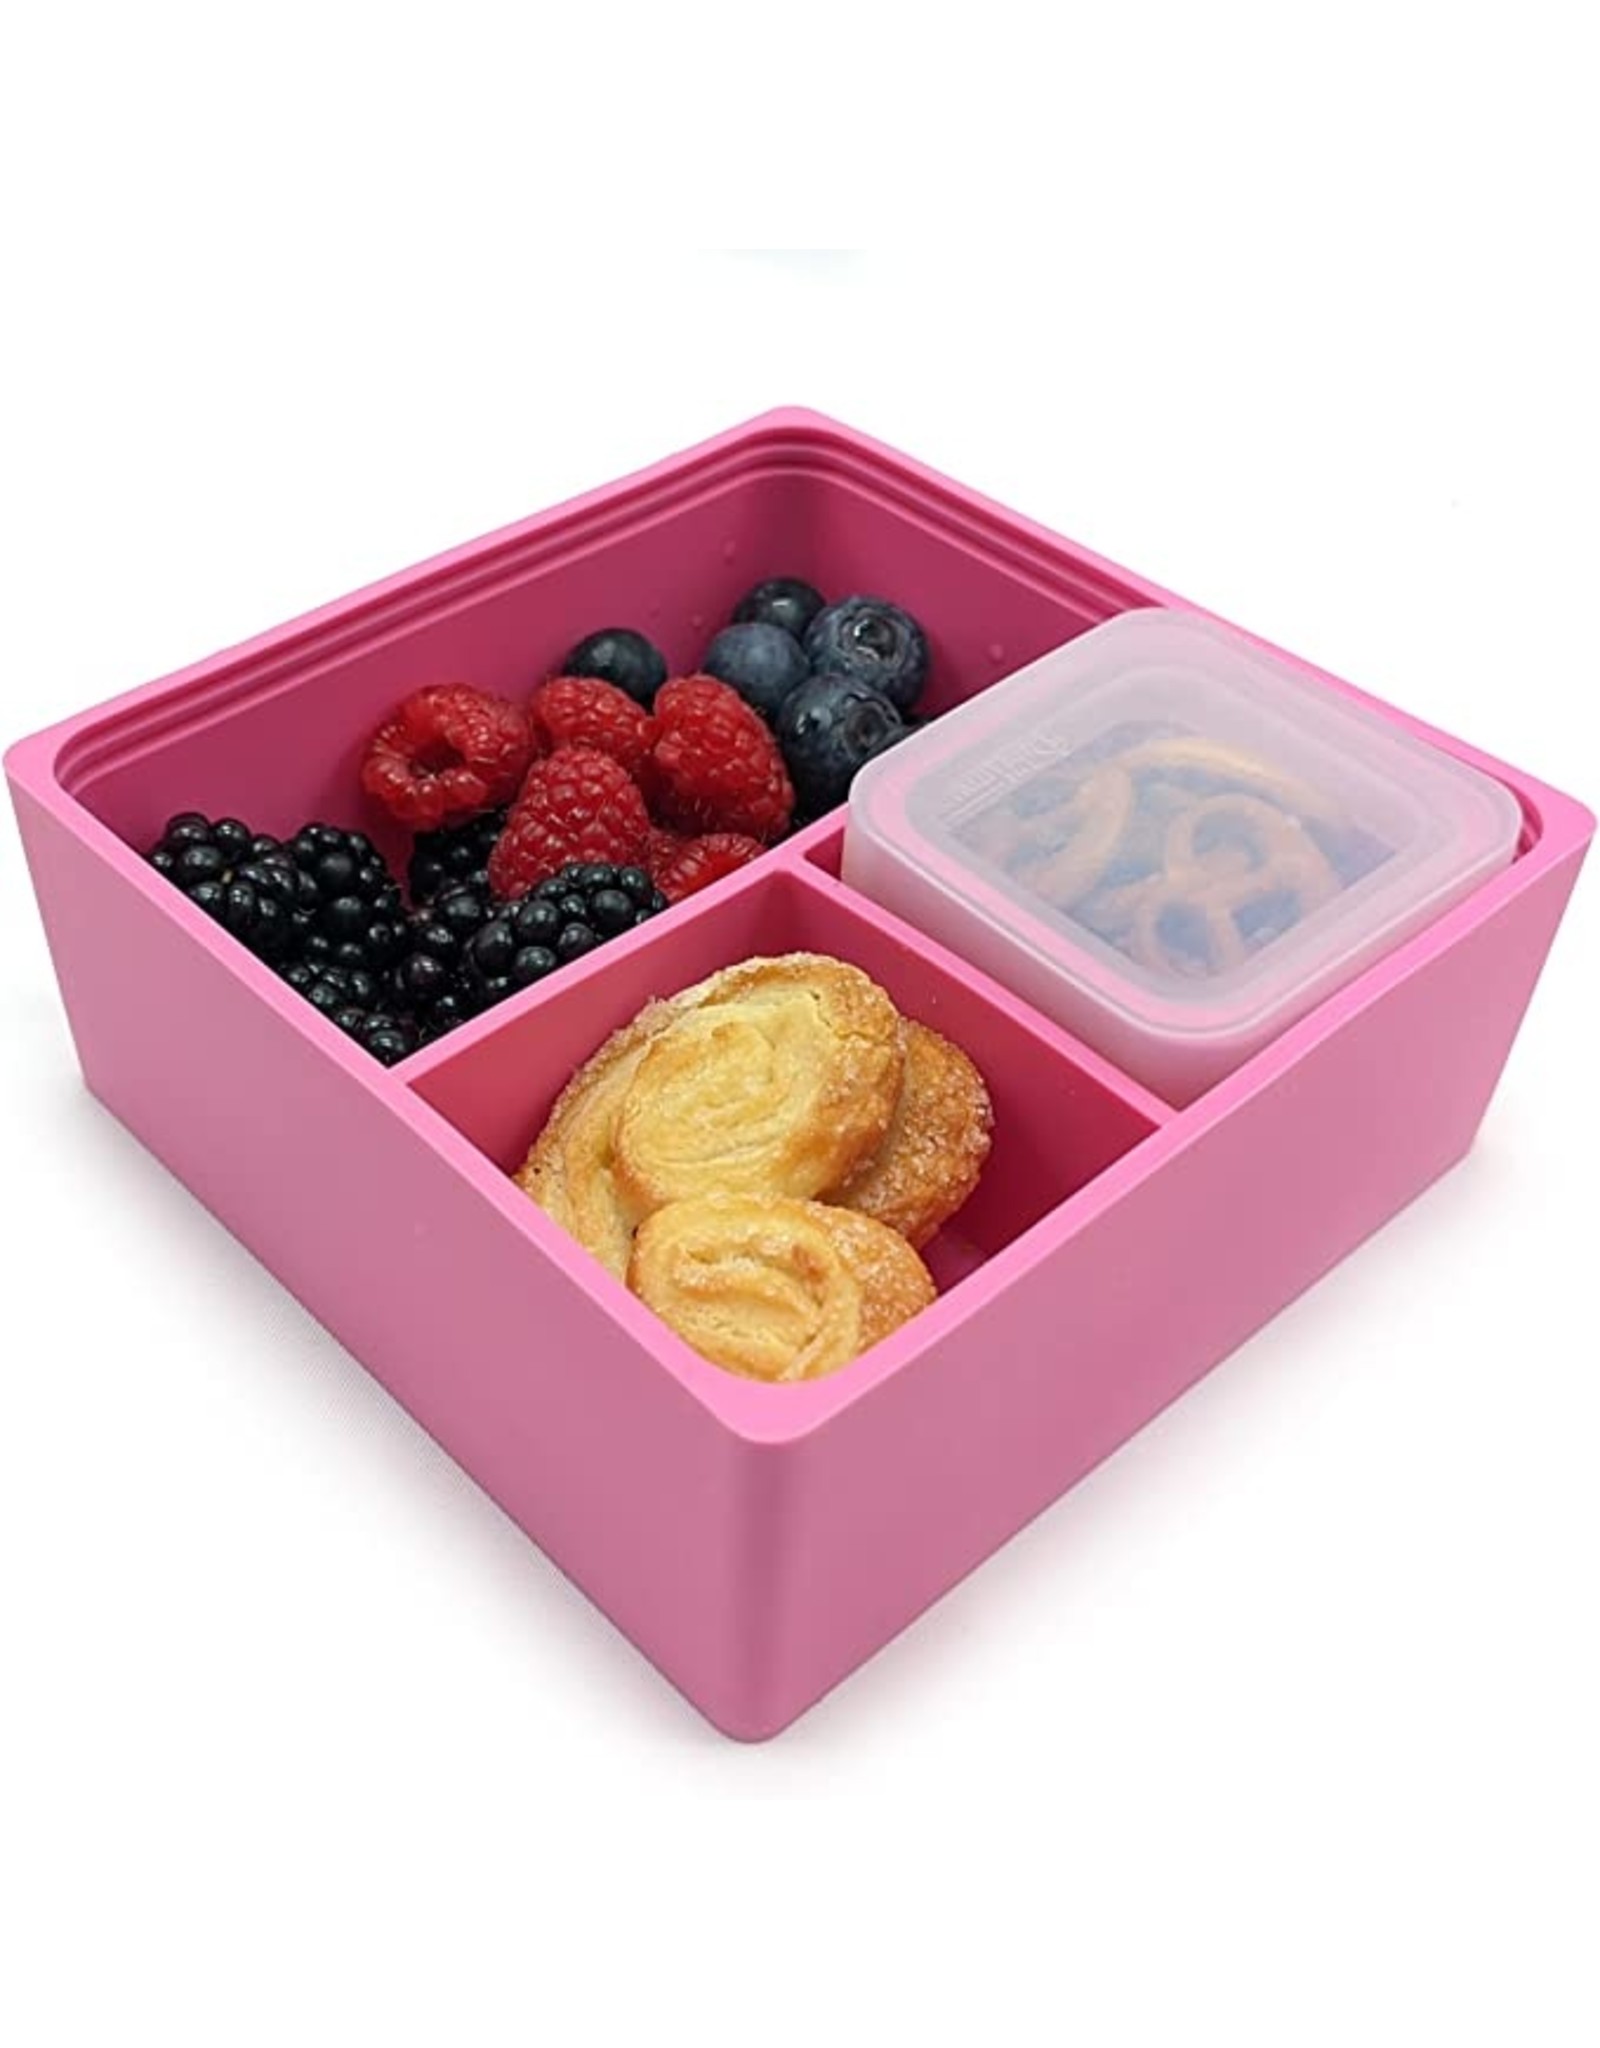 All Silicone Lunch Box 3 Compartment Pink - The Toy Quest